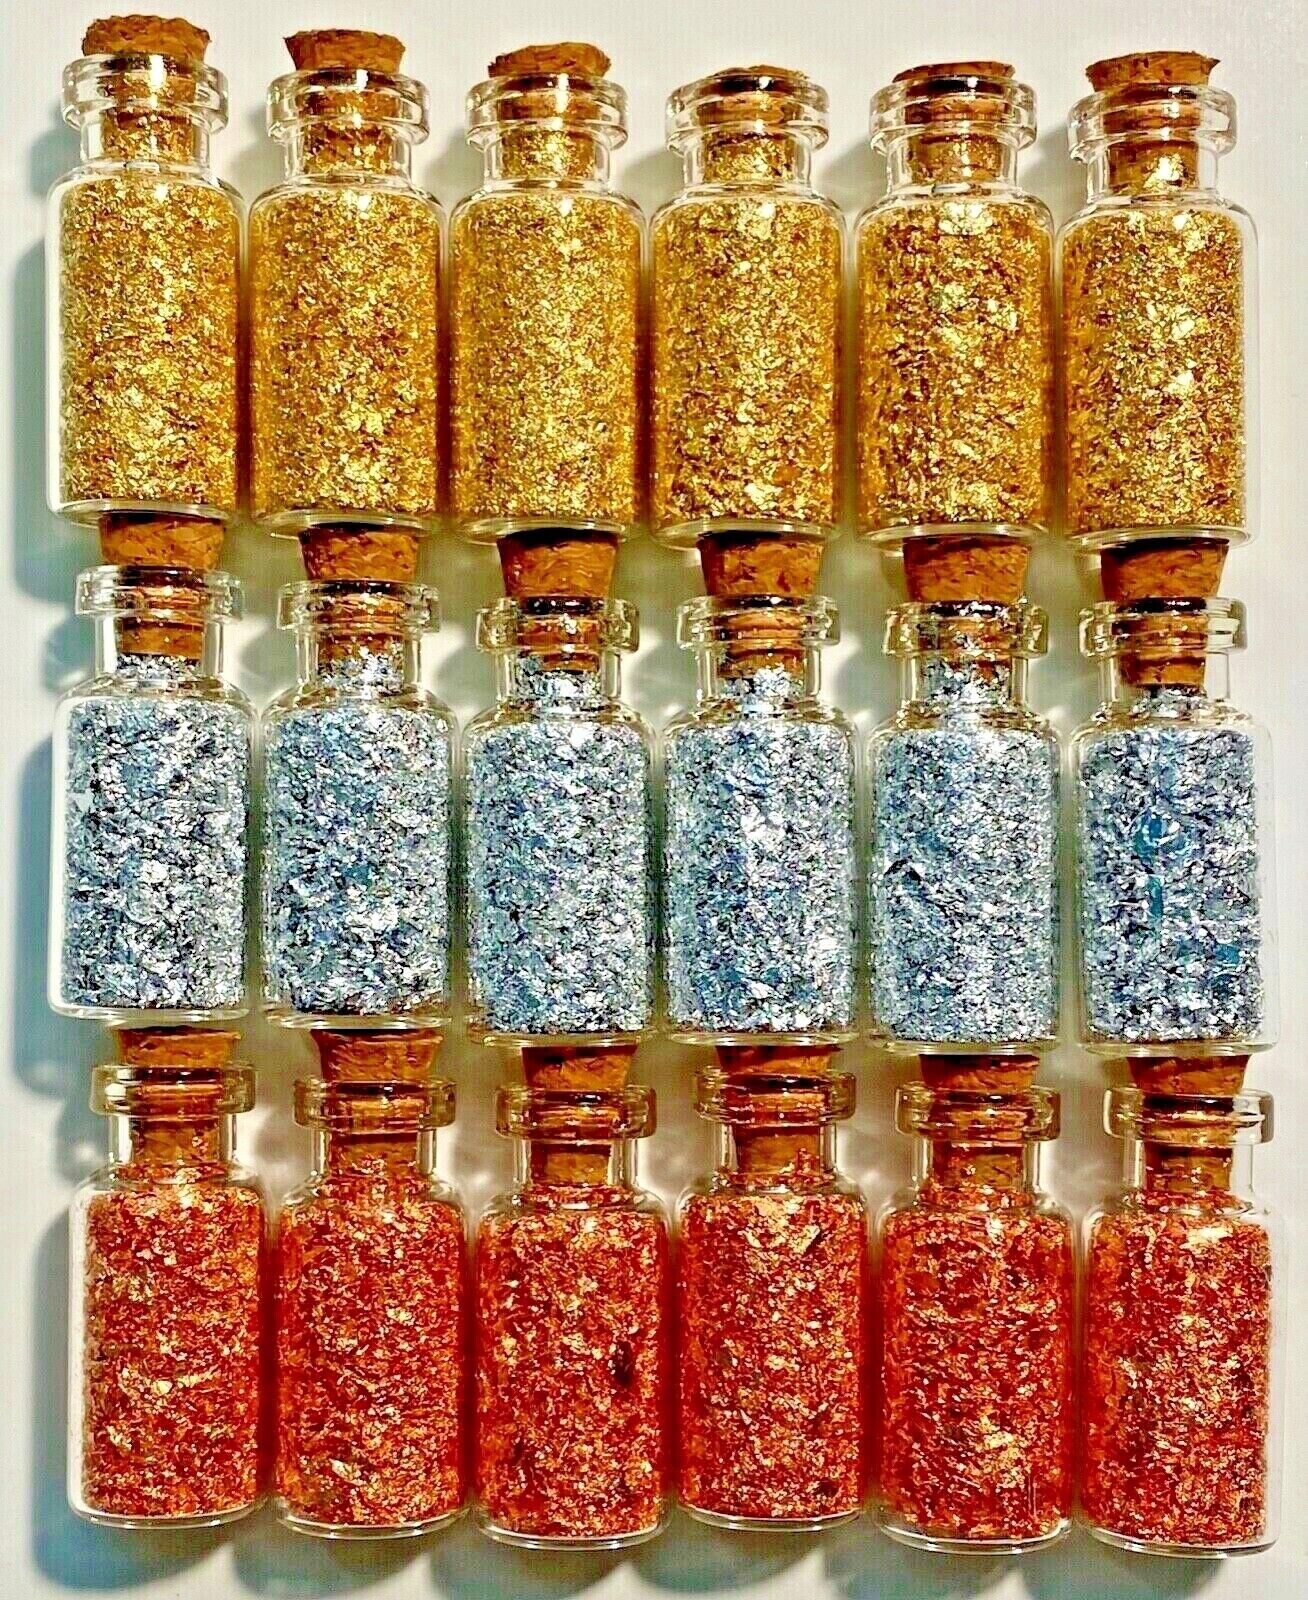 18 Bottles of Large...Copper - Silver & Gold Flakes.. Lowest price on the Net